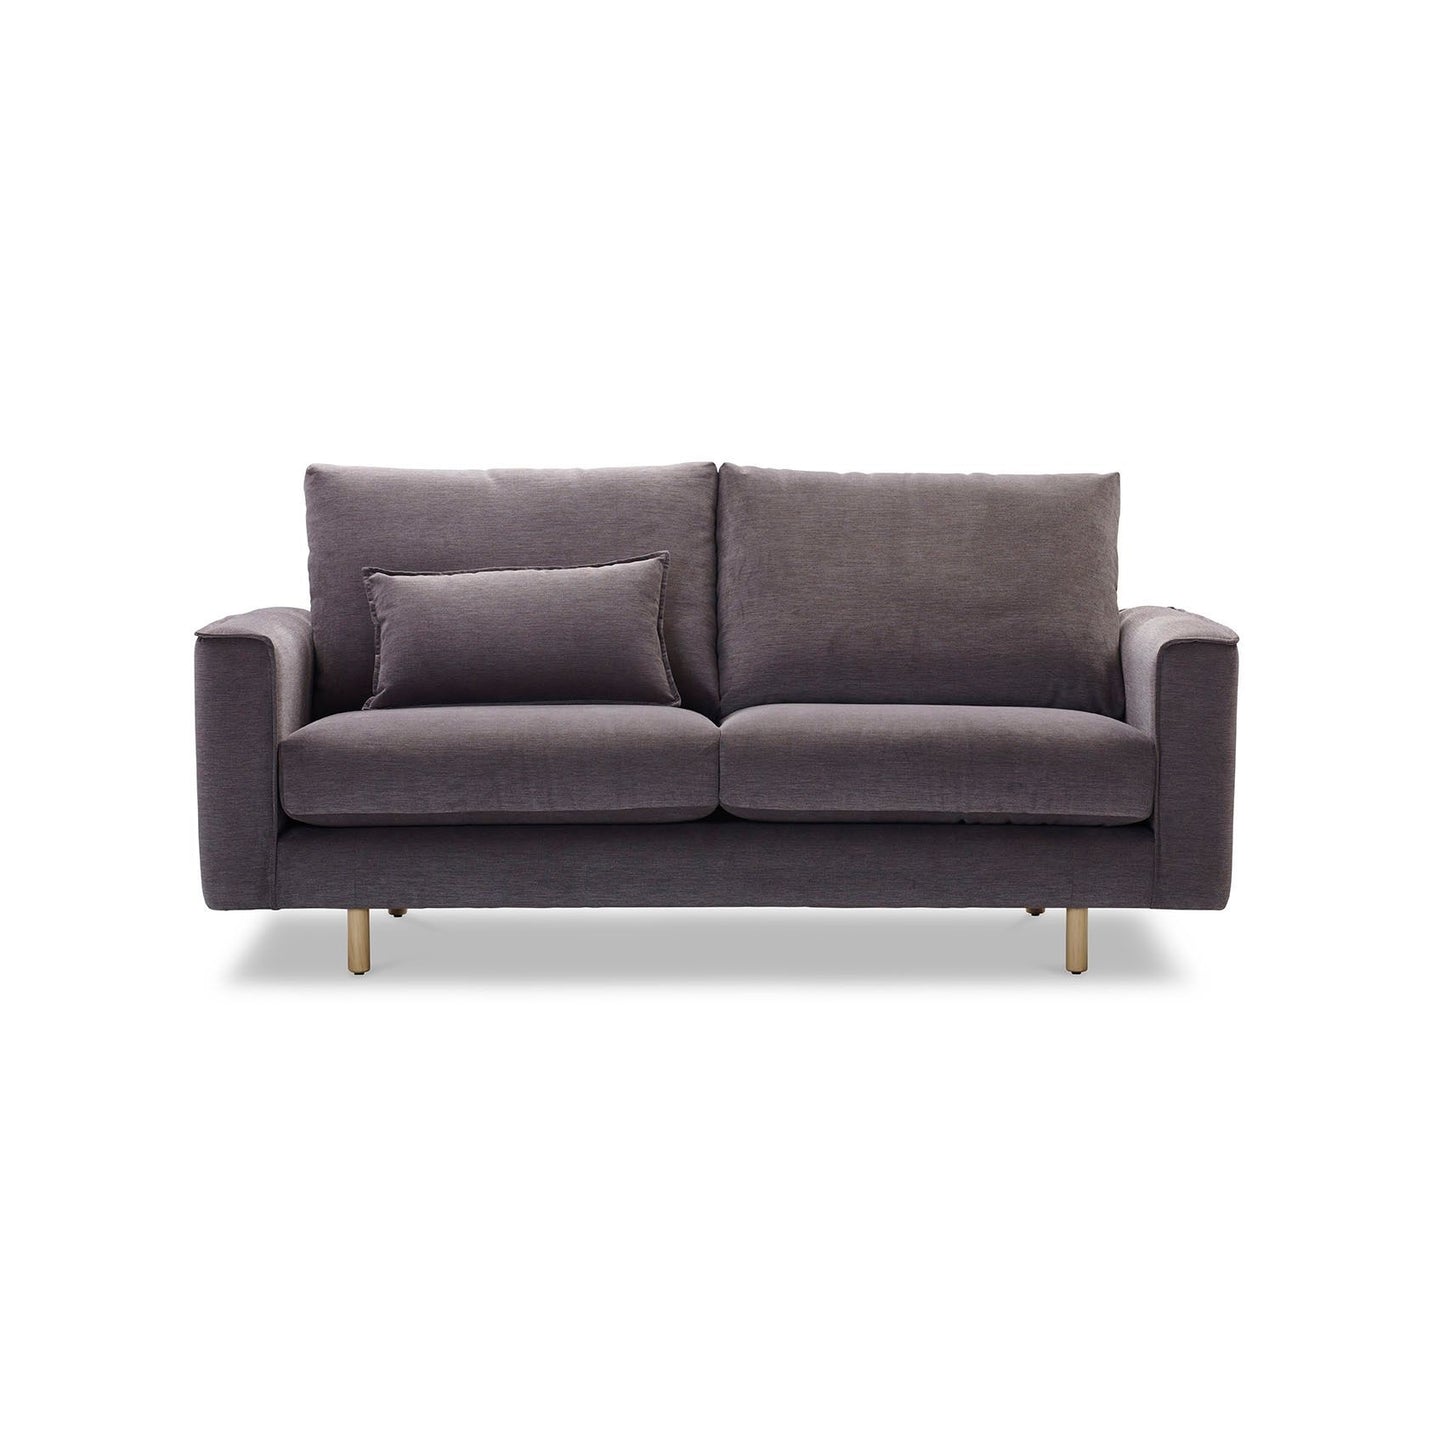 Alpine Sofa by Molmic available from Make Your House A Home, Furniture Store located in Bendigo, Victoria. Australian Made in Melbourne.